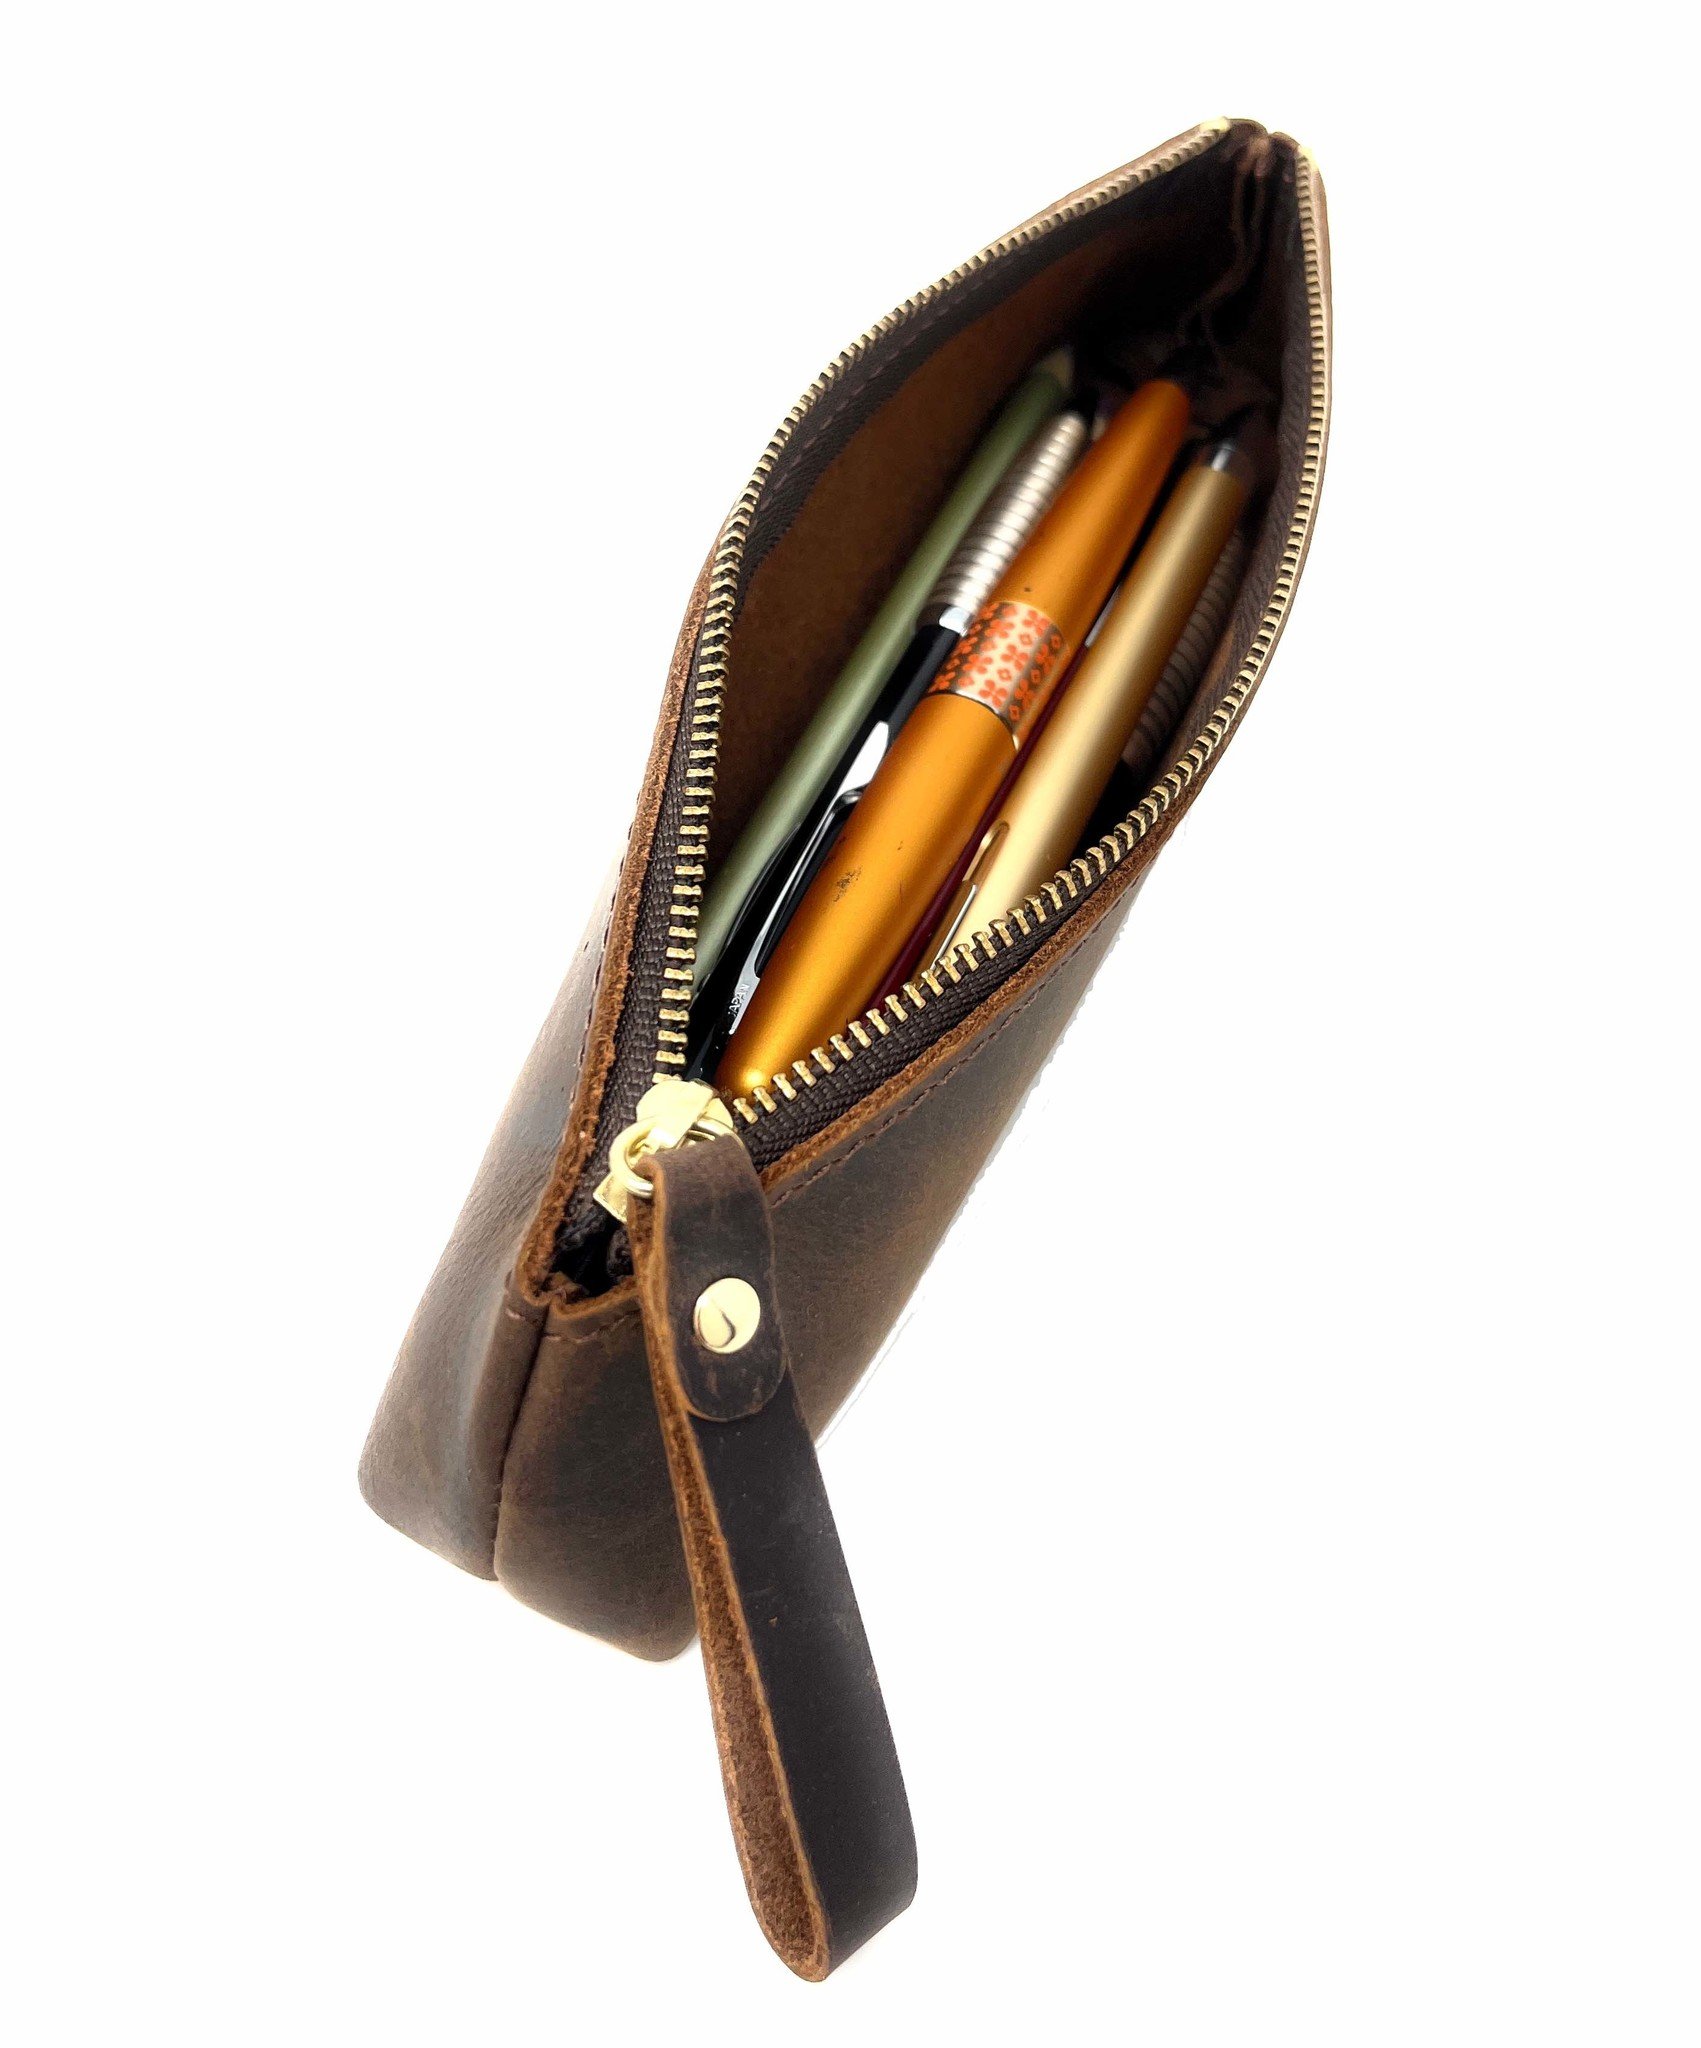 Pencil Case - Pen Holder - Leather - Fits More Than 15 Pens - Pencil Pouch With Zipper for Men Women - Dark Brown-3